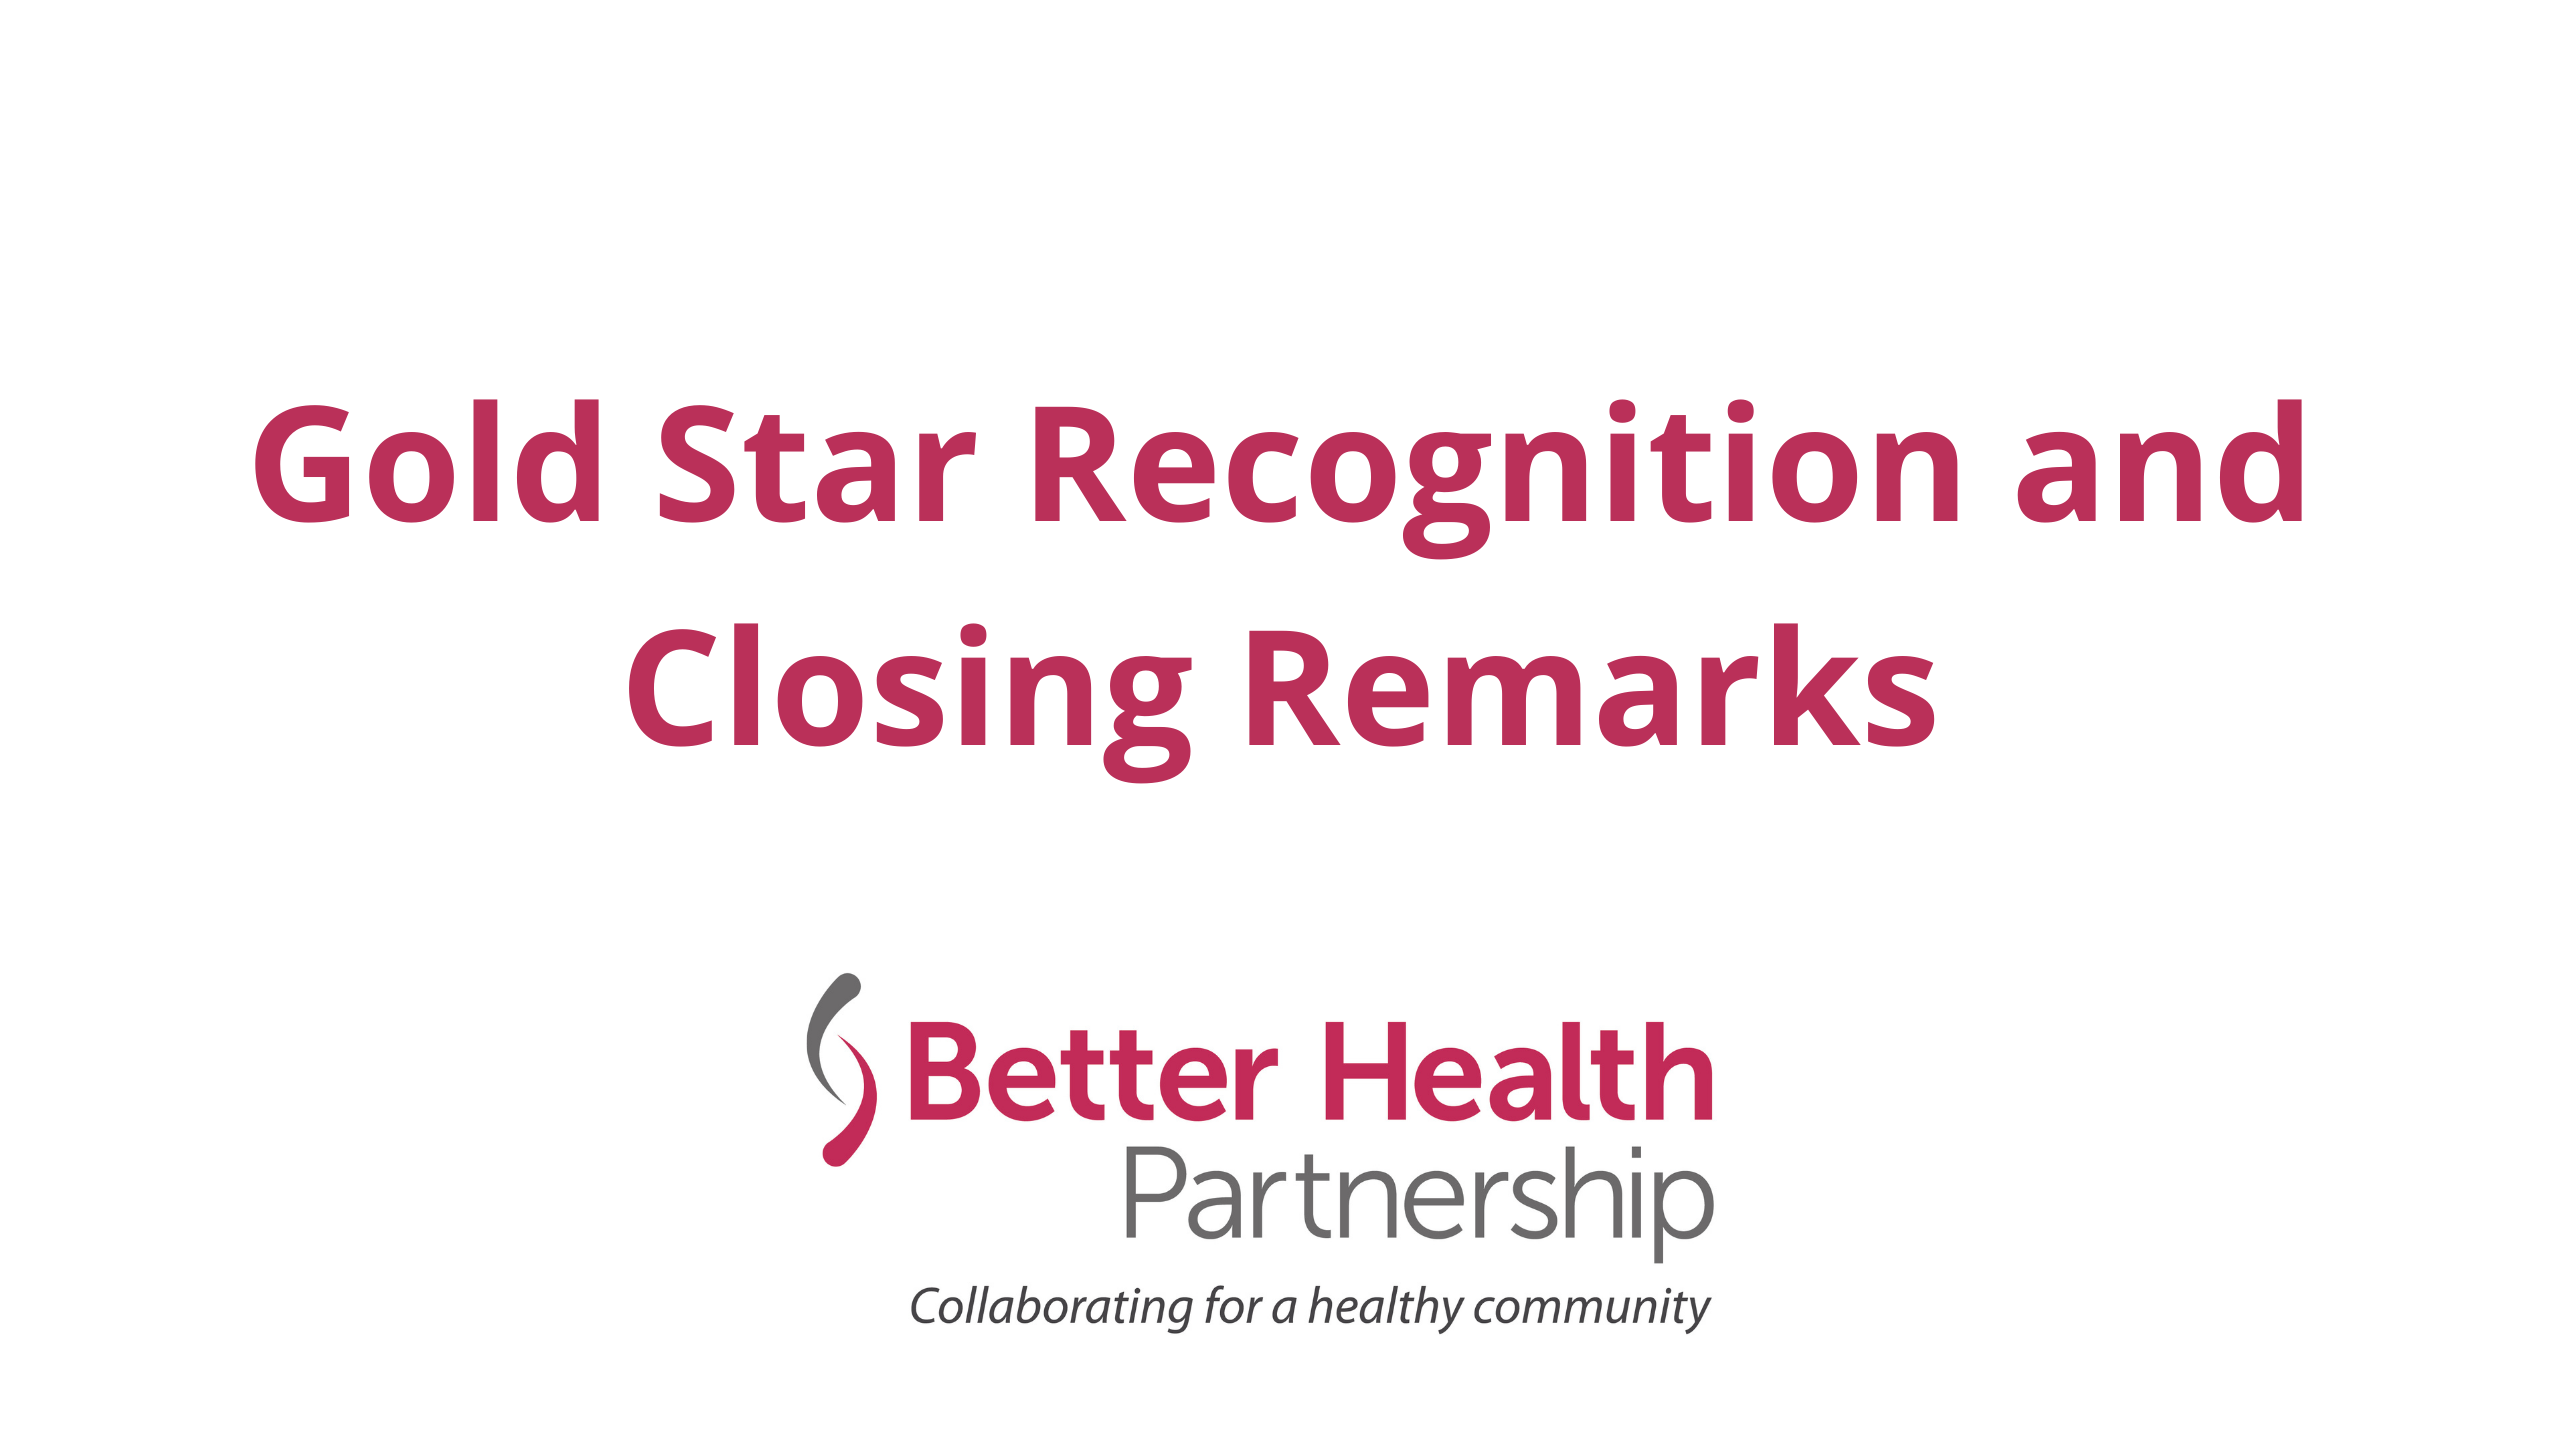 Gold Star Recognition and Closing Remarks